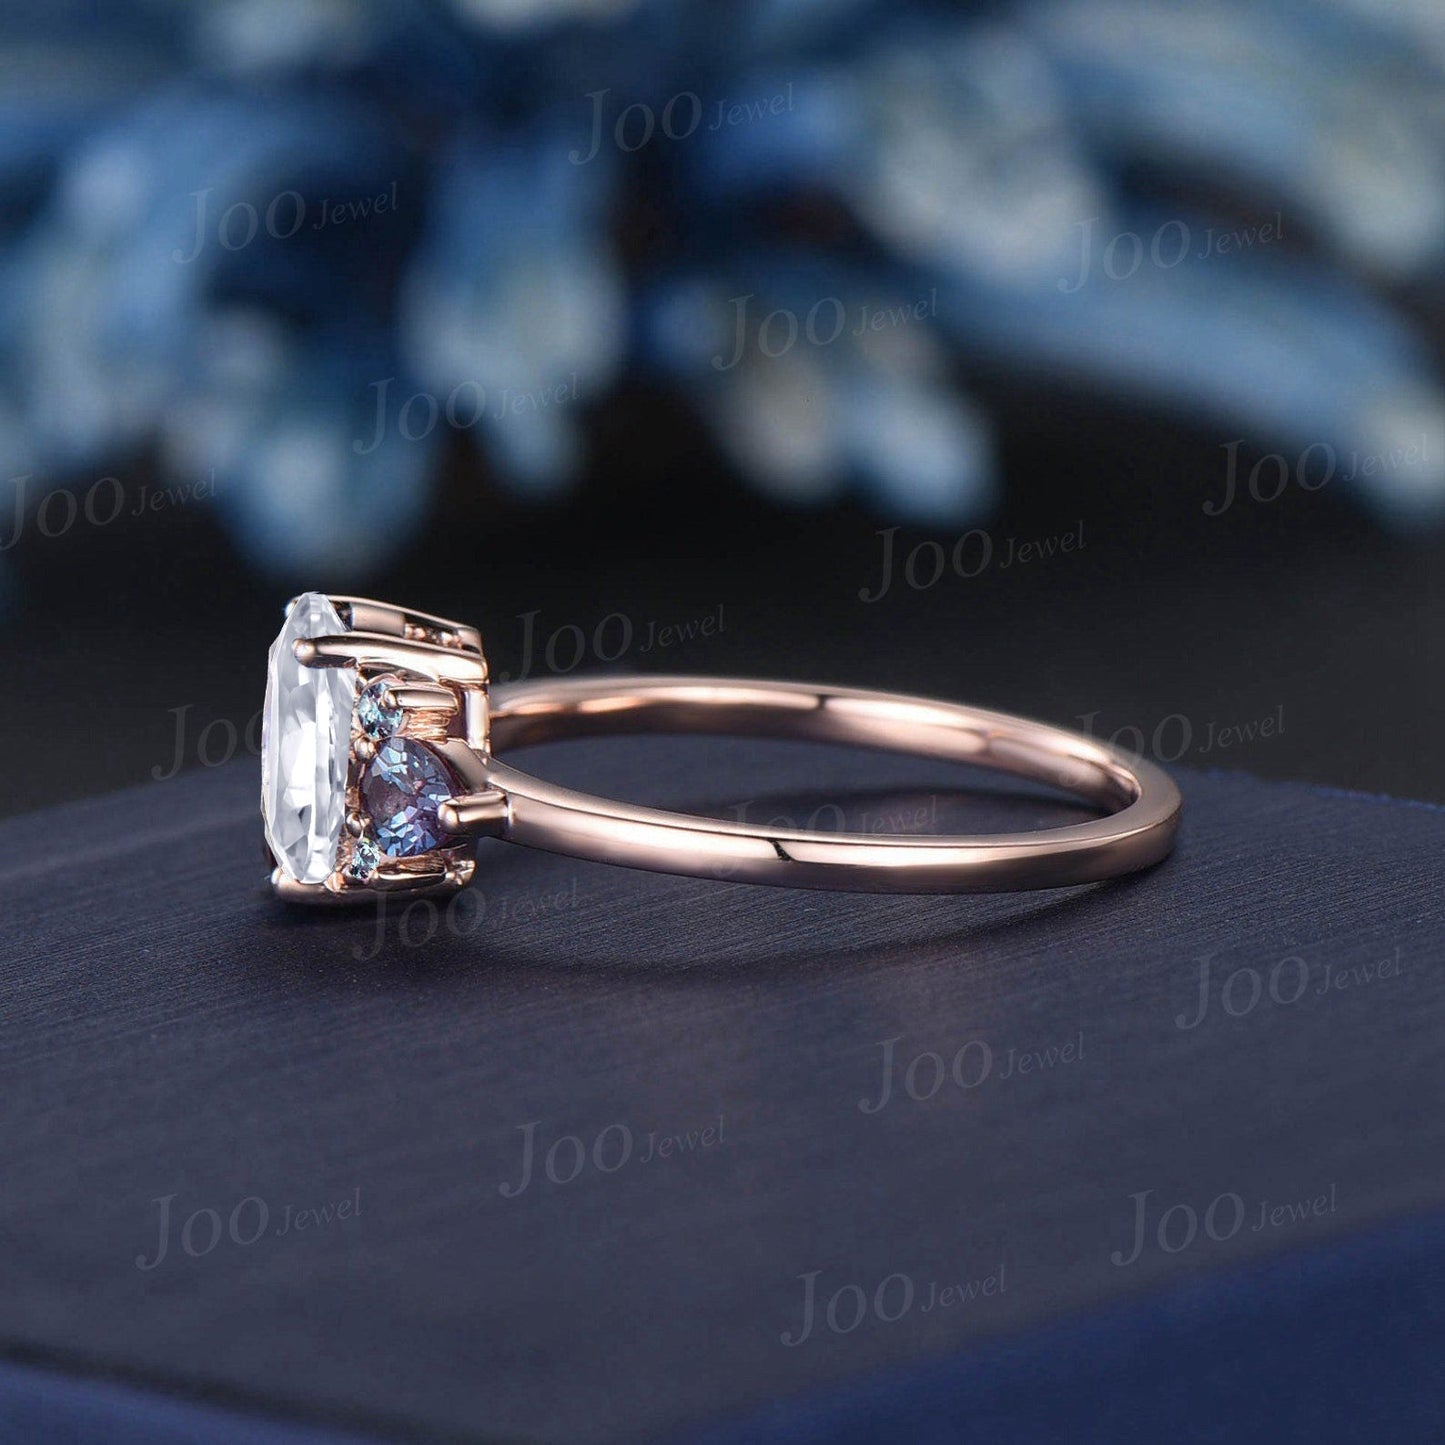 1.5CTW Oval Flawless Diamond Engagement Ring 14K Rose Gold Vintage Color-Change Alexandrite Wedding Ring Unique Anniversary/Proposal Gifts Fiancée